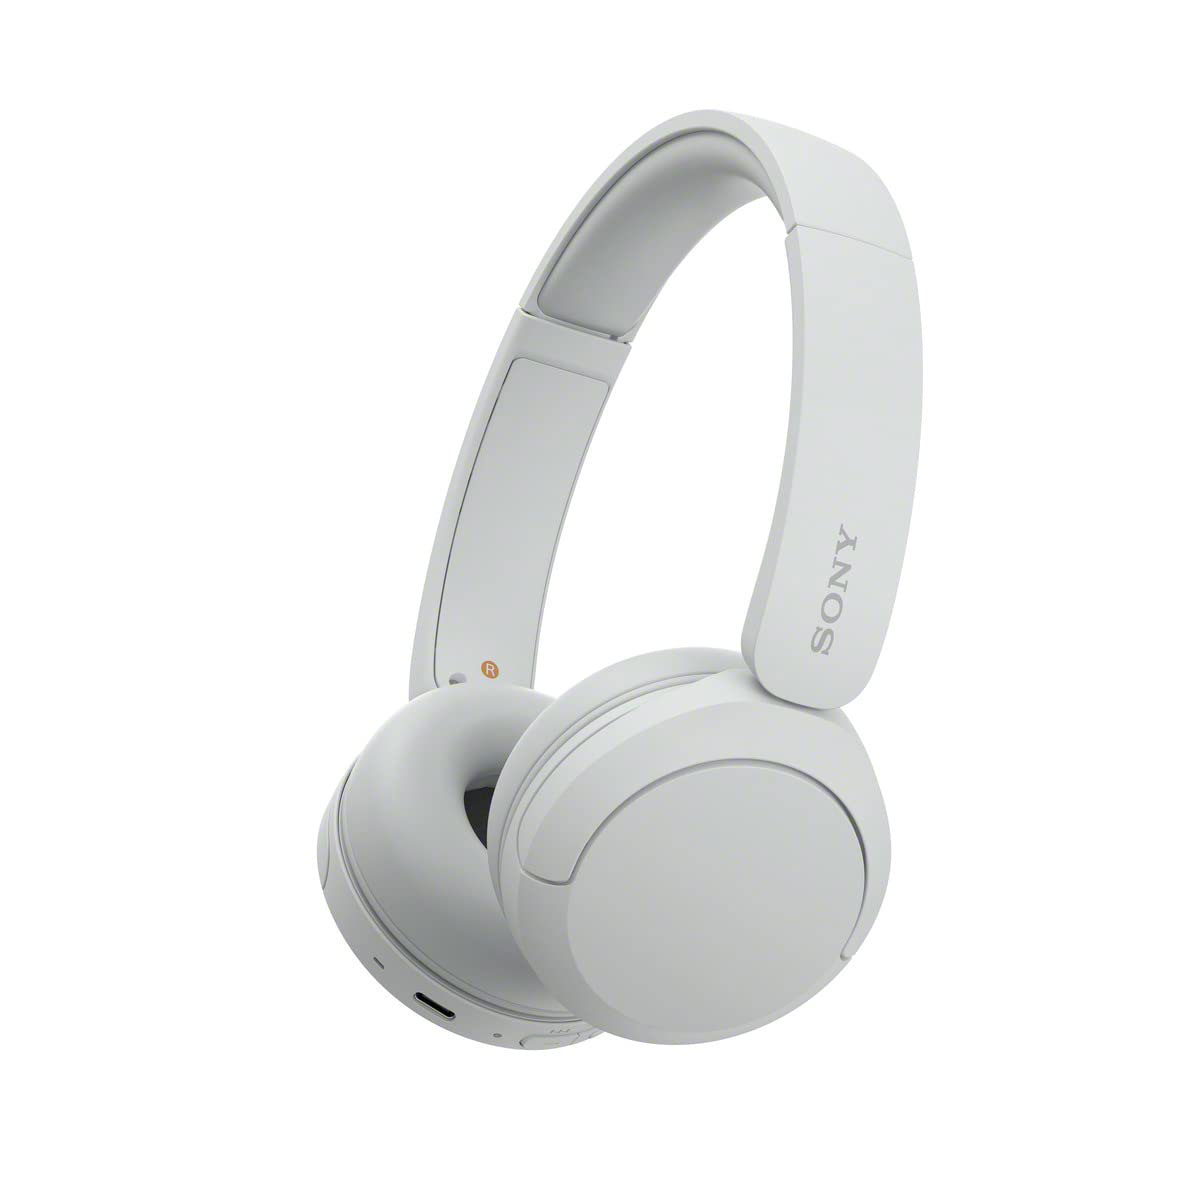 Sony - Wireless Headphones Bluetooth On-Ear Headset with Microphone, White